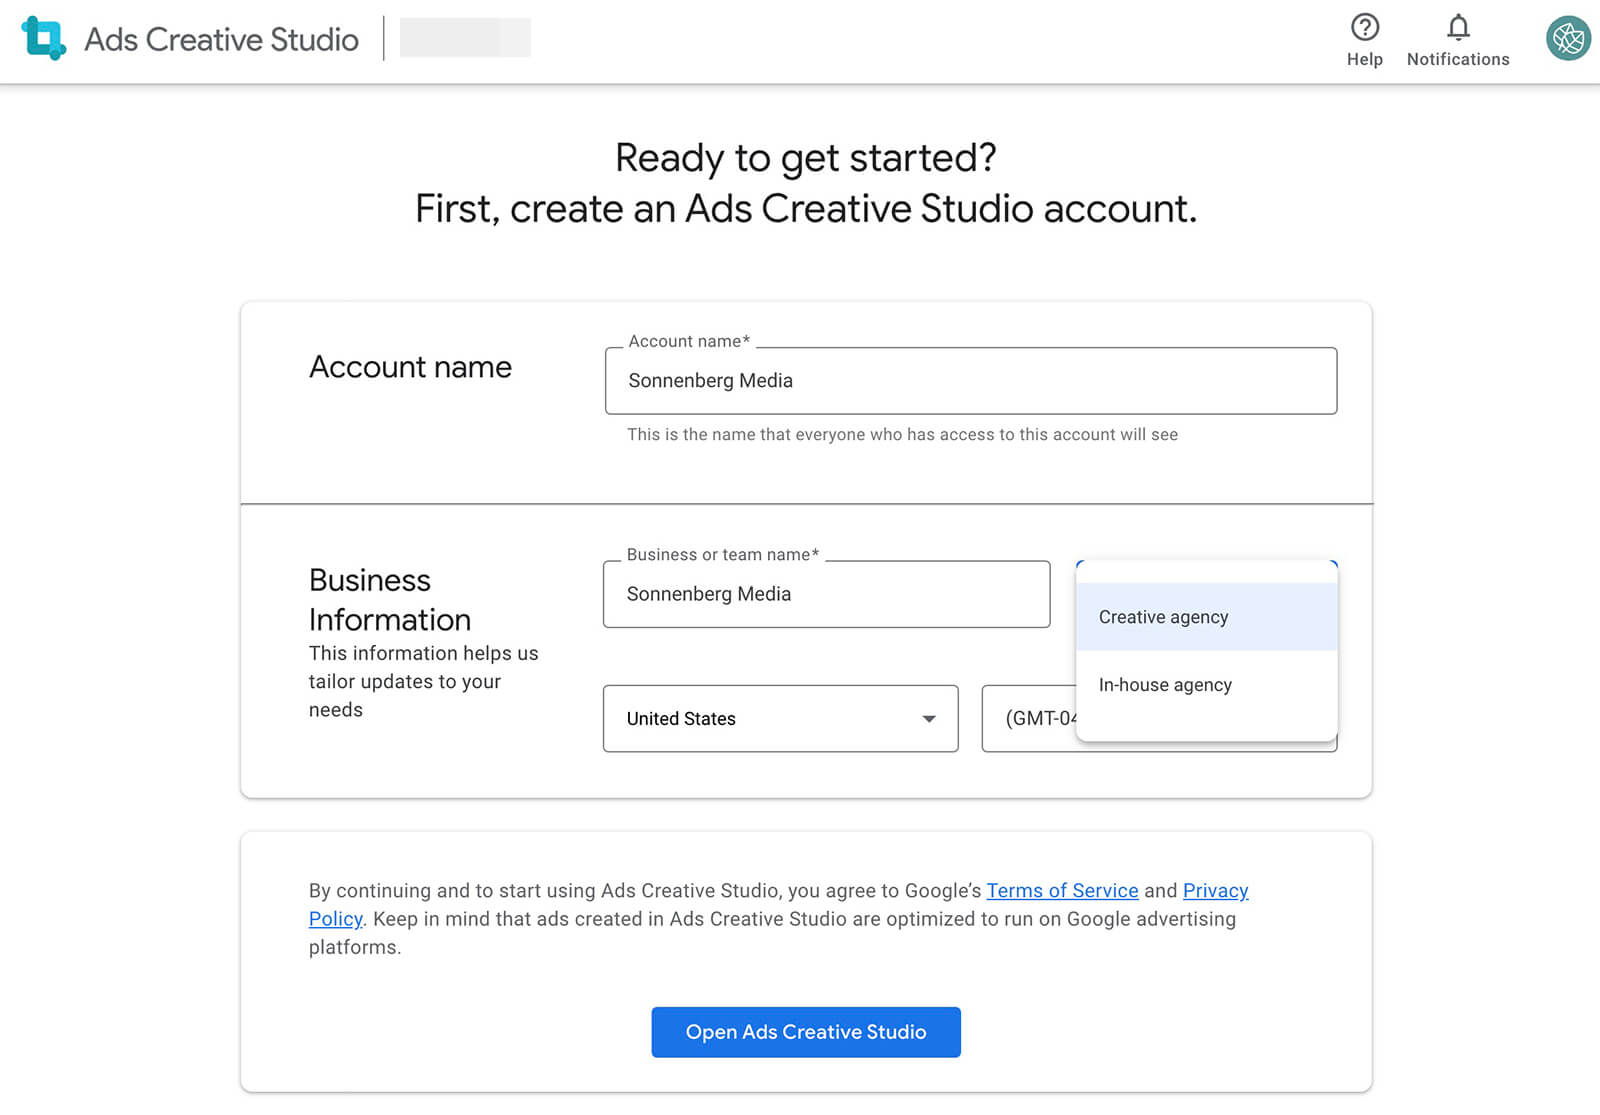 create-youtube-video-ads-quickly-use-ads-creative-studio-to-plan-customize-set-up-account-landing-page-1